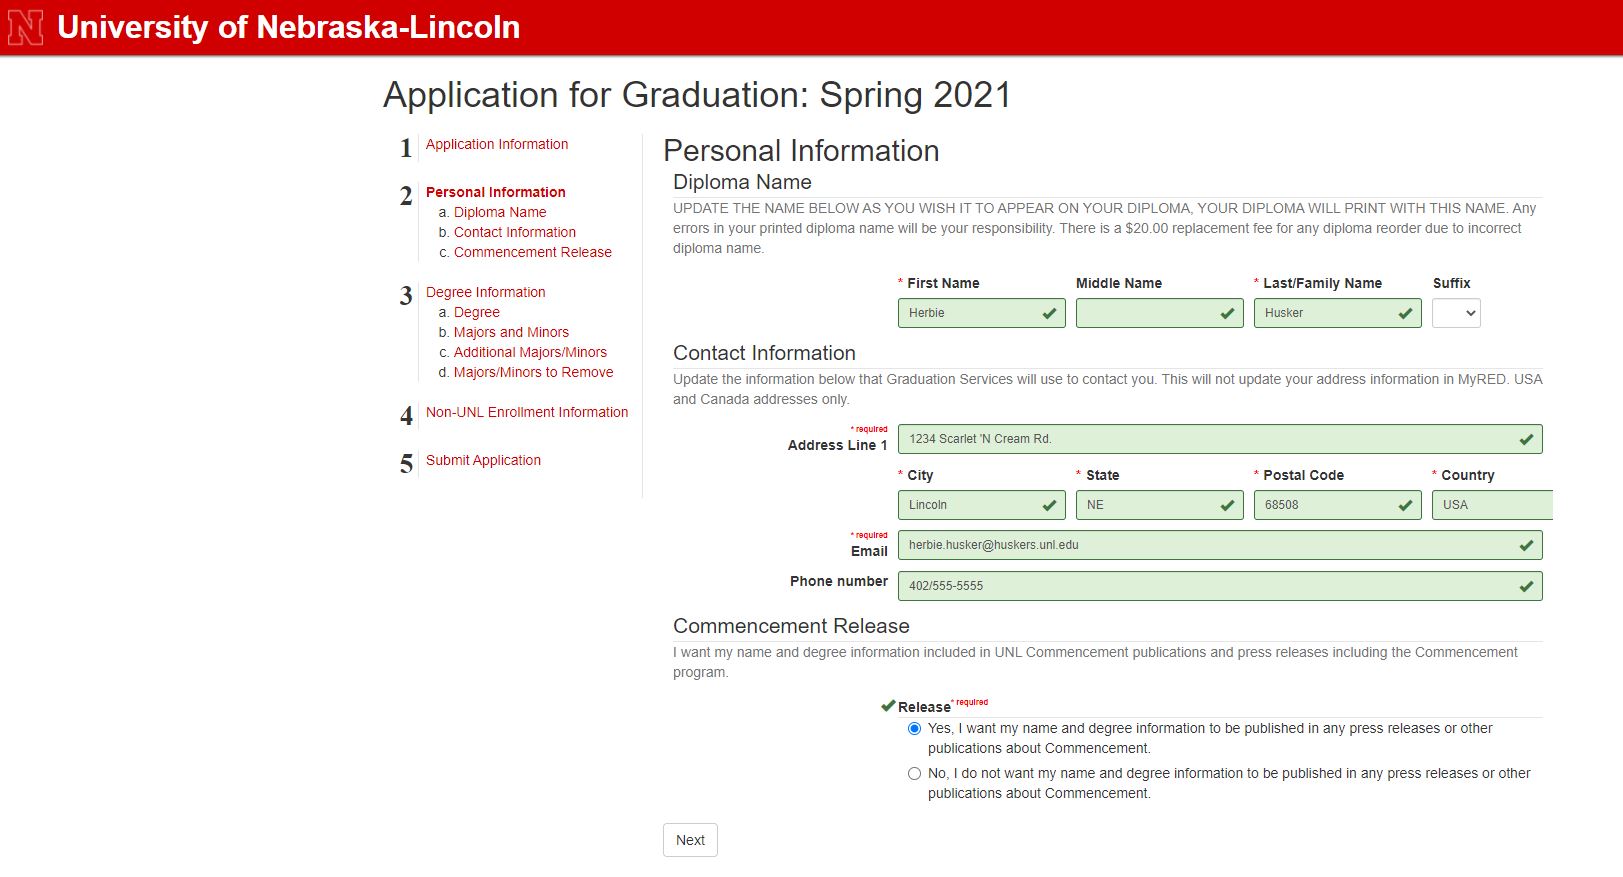 Application for Graduation personal information page